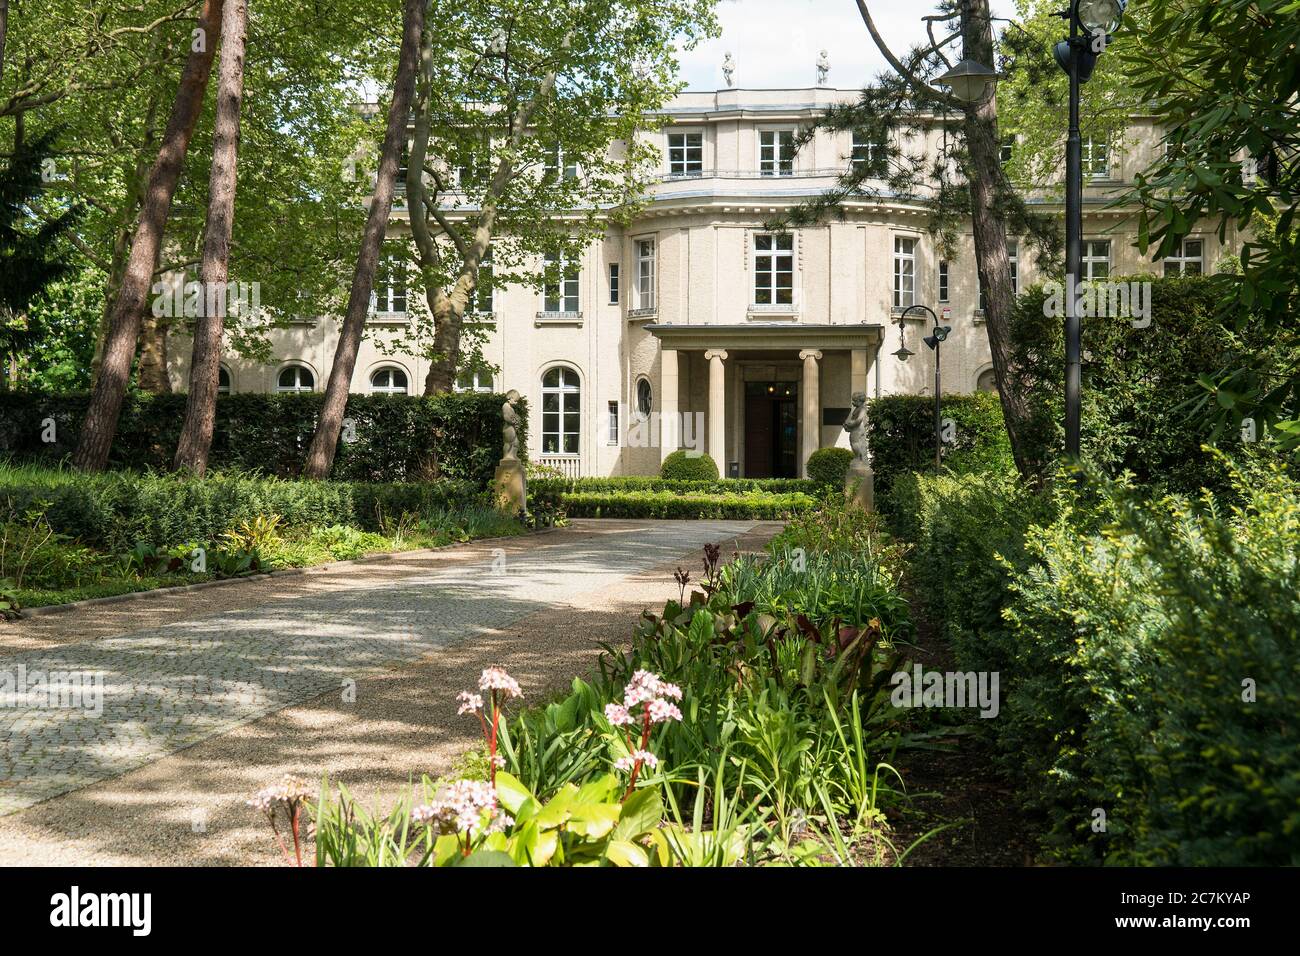 Berlin, Wannsee, House of the Wannsee Conference, main portal Stock Photo